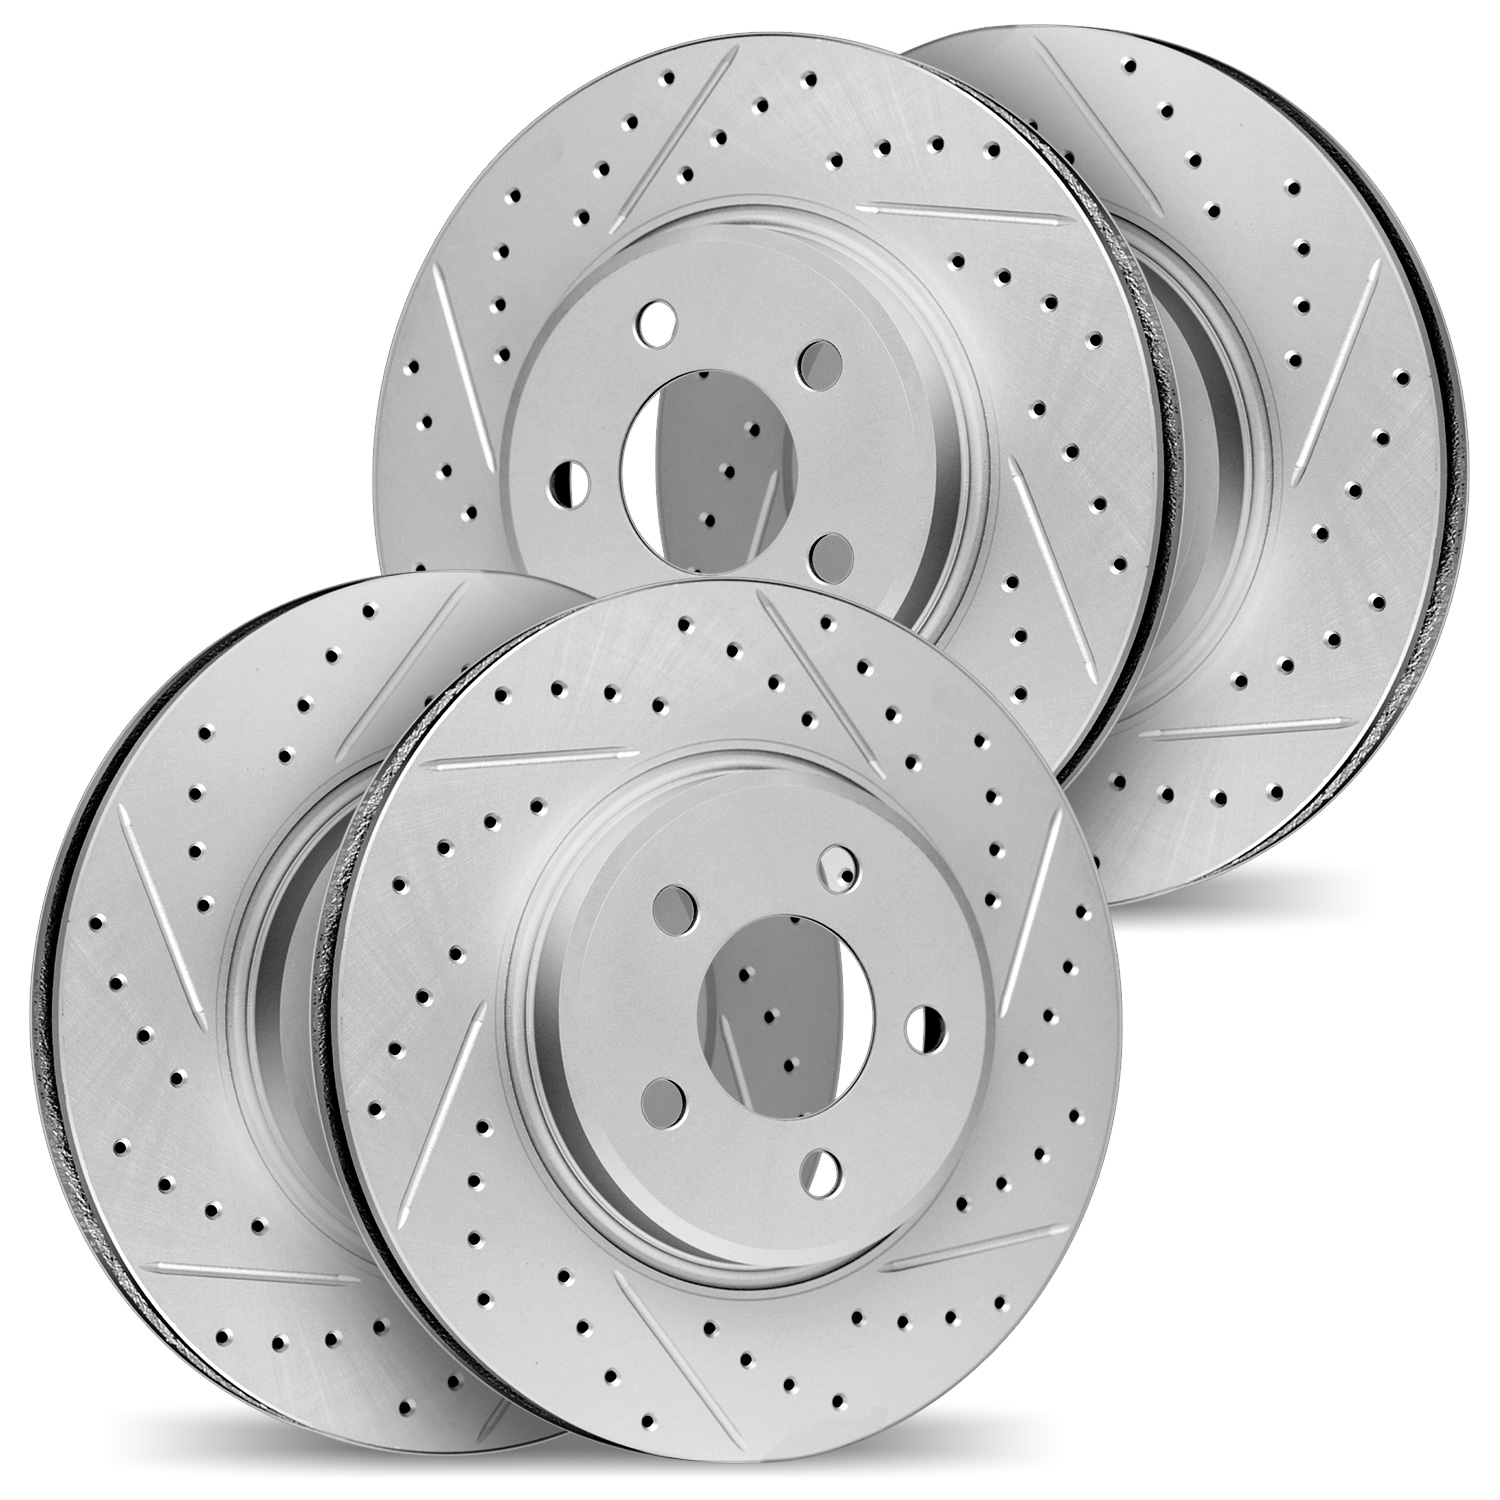 2004-68000 Geoperformance Drilled/Slotted Brake Rotors, Fits Select Infiniti/Nissan, Position: Front and Rear